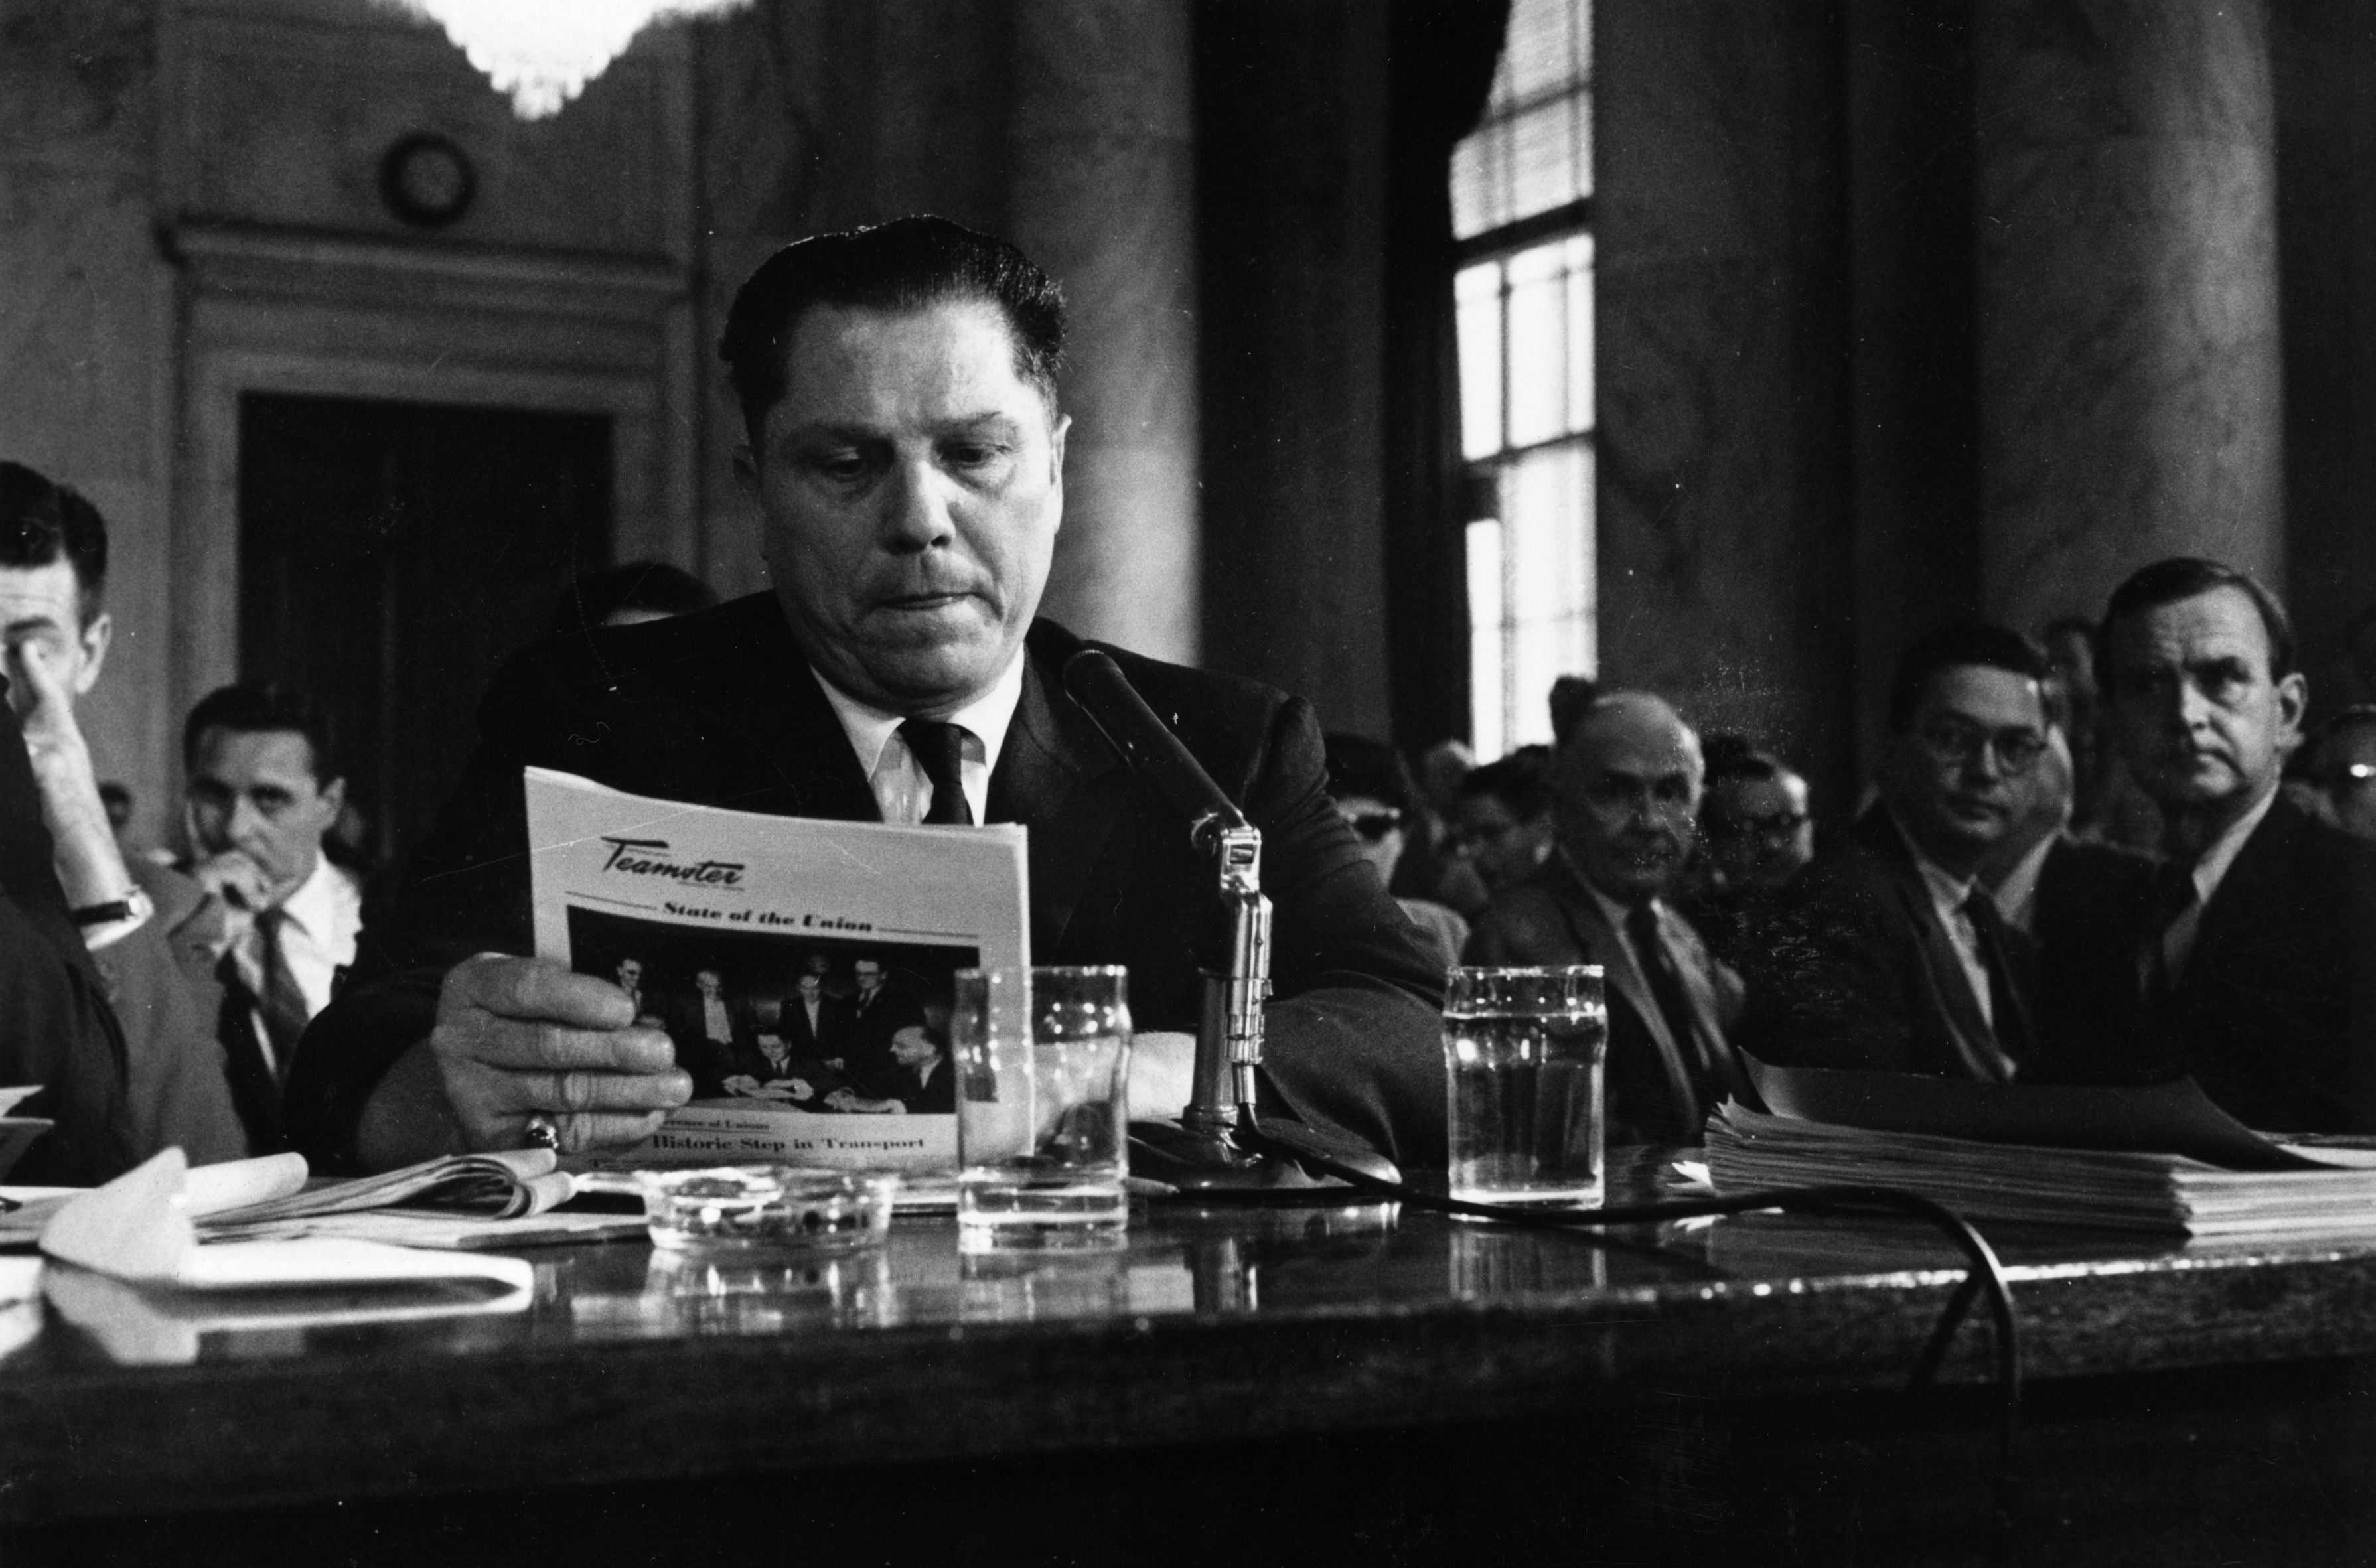 Jimmy Hoffa’s disappearance has become one of the most enduring mysteries of the past 50 years